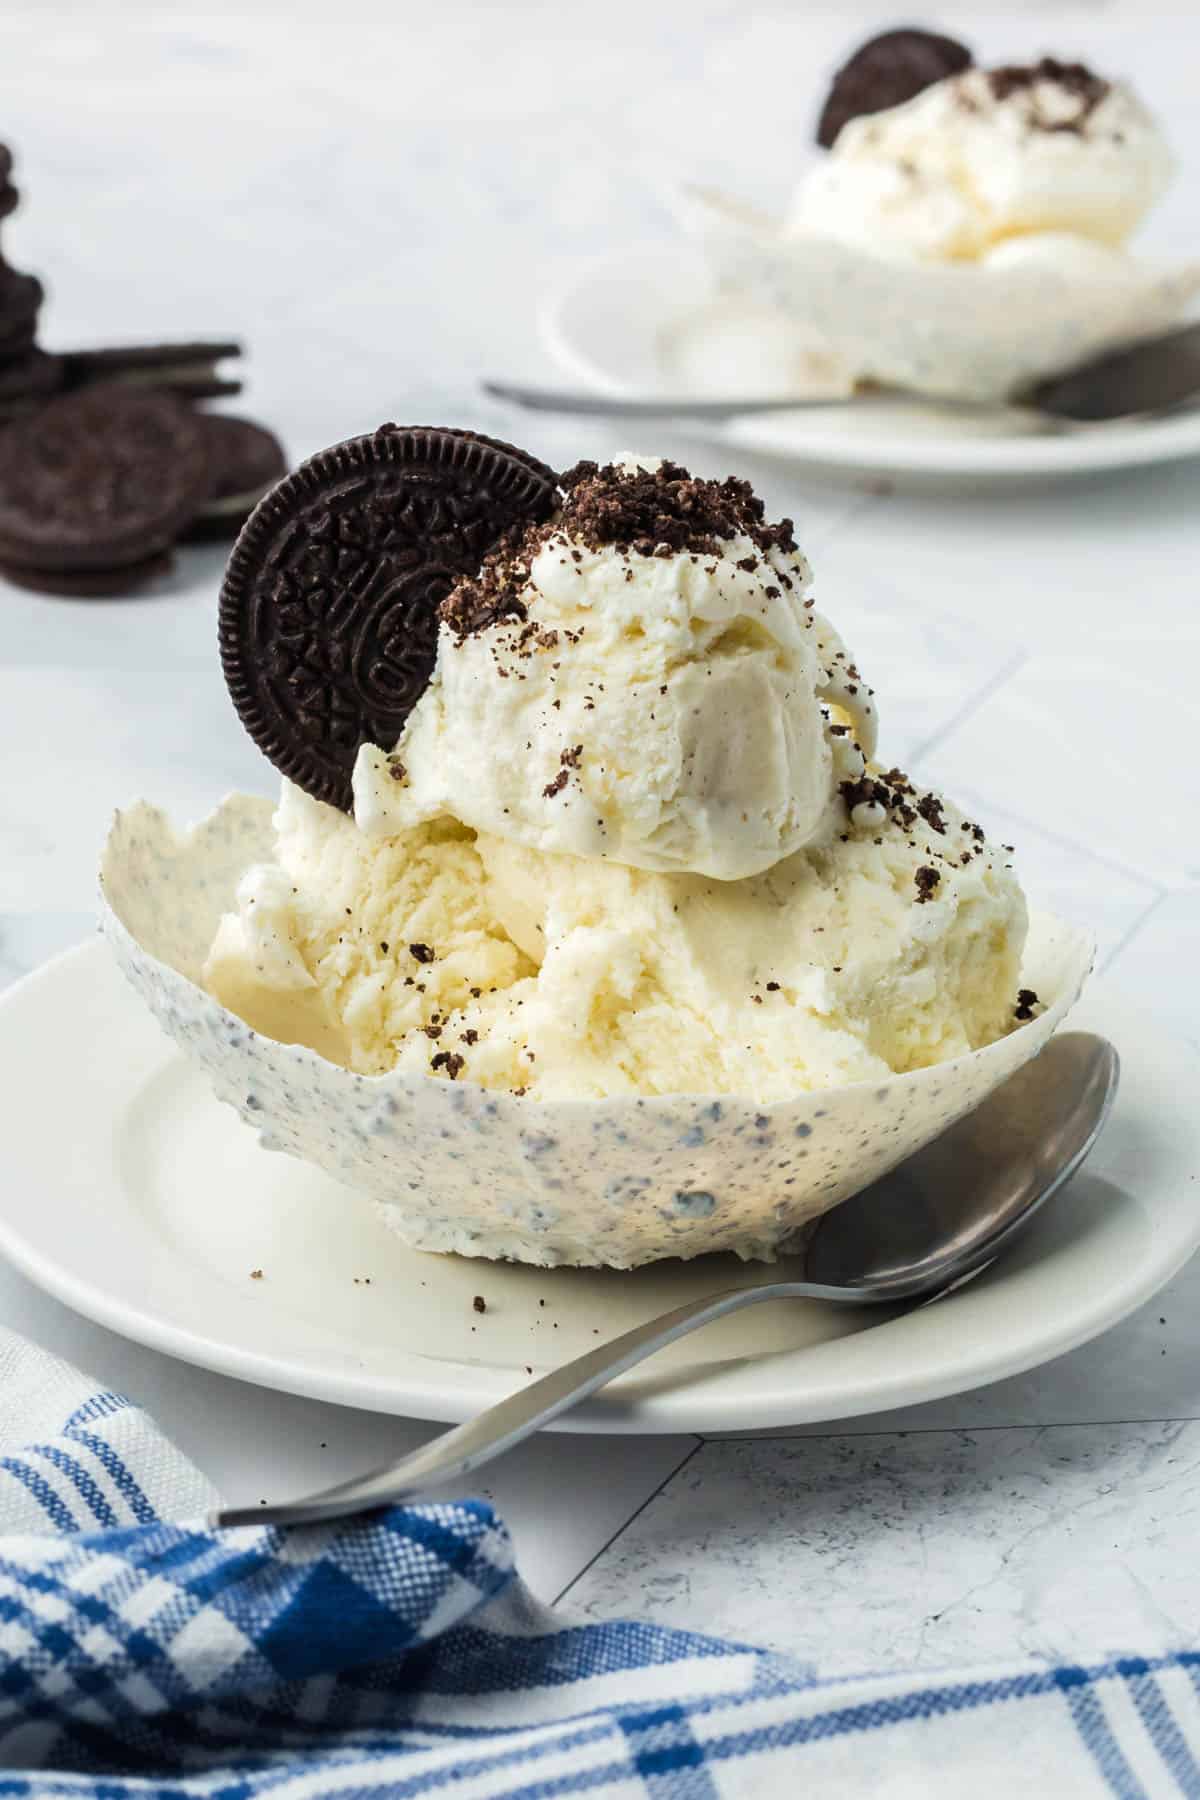 An Oreo balloon bowl filled with ice cream and crushed Oreo cookies on a plate with a spoon.